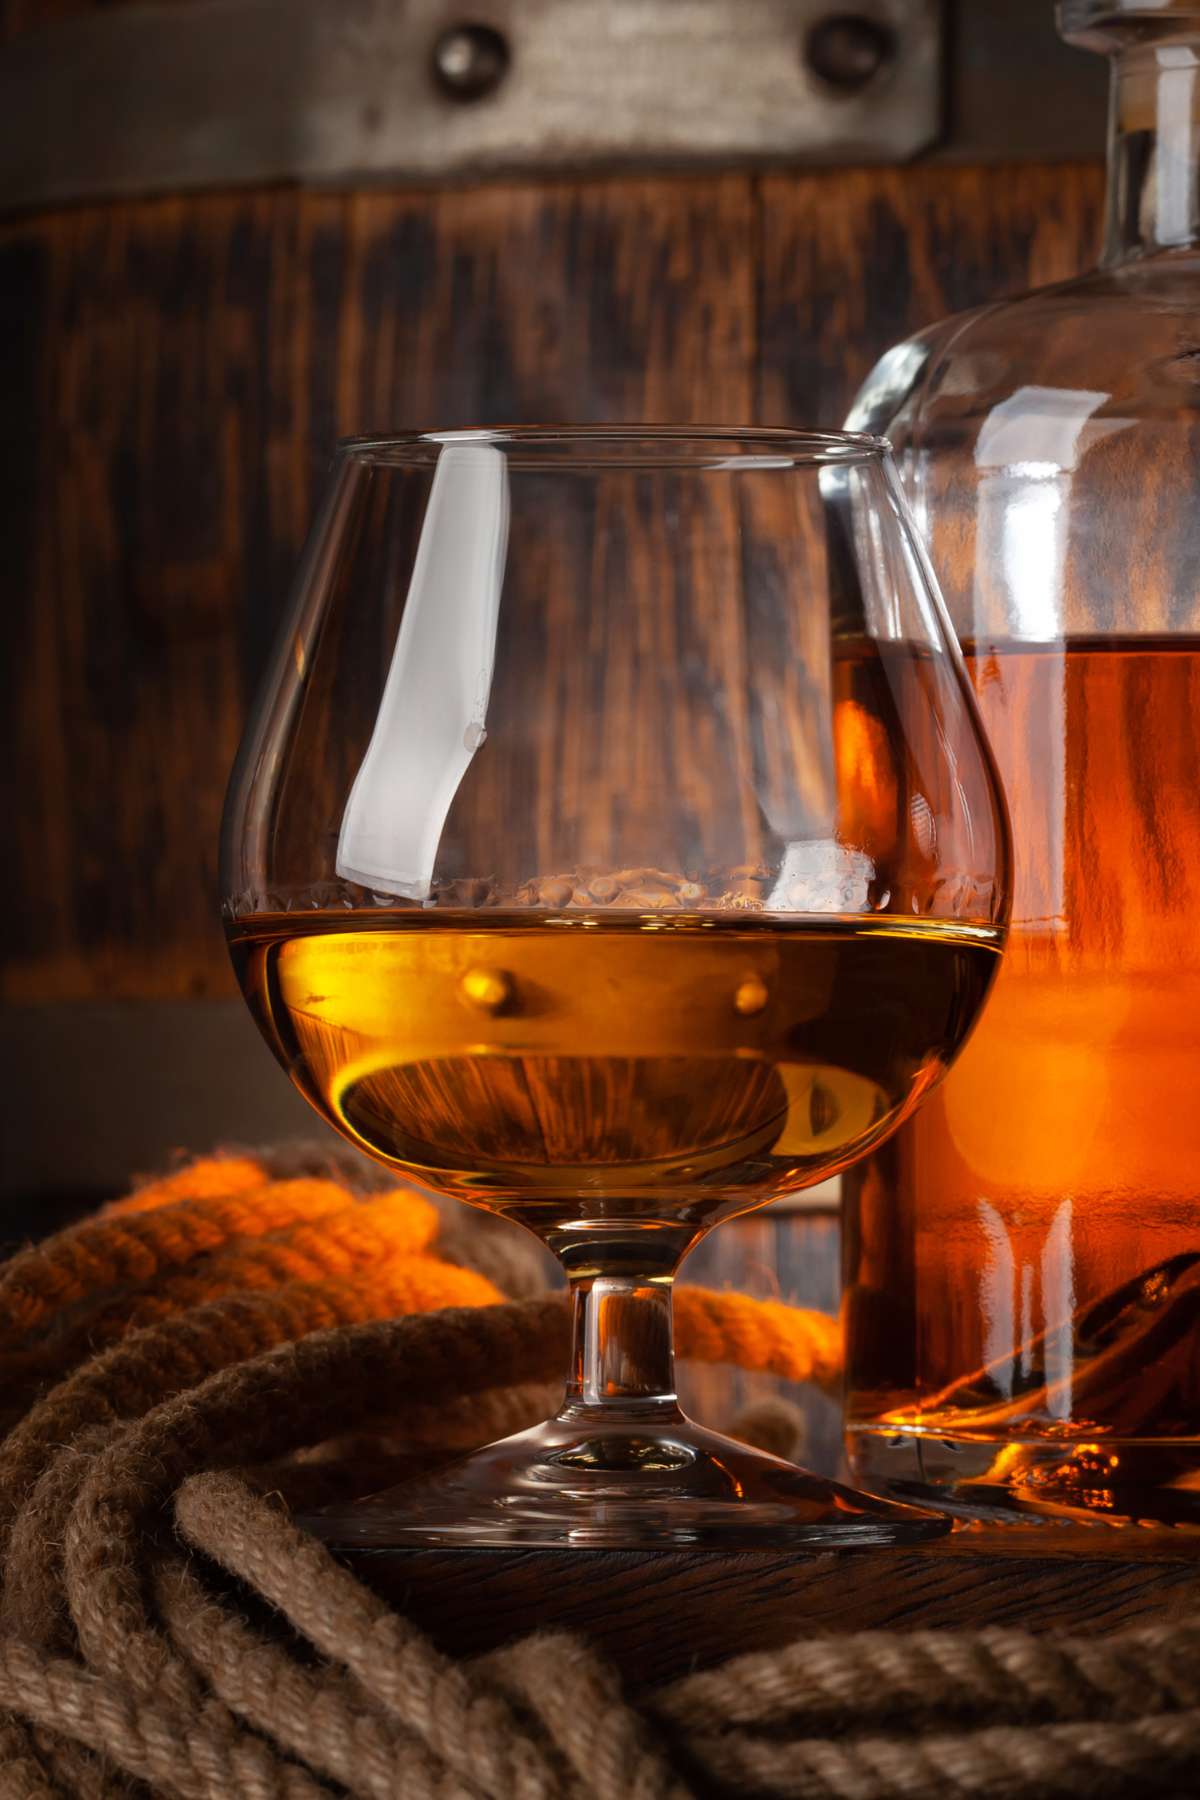 Ever wonder what a drink neat means? When it comes to enjoying a fine beverage, there are various ways to enjoy its flavors and complexities. One such method is drinking it neat, which has its own unique significance in the world of spirits.